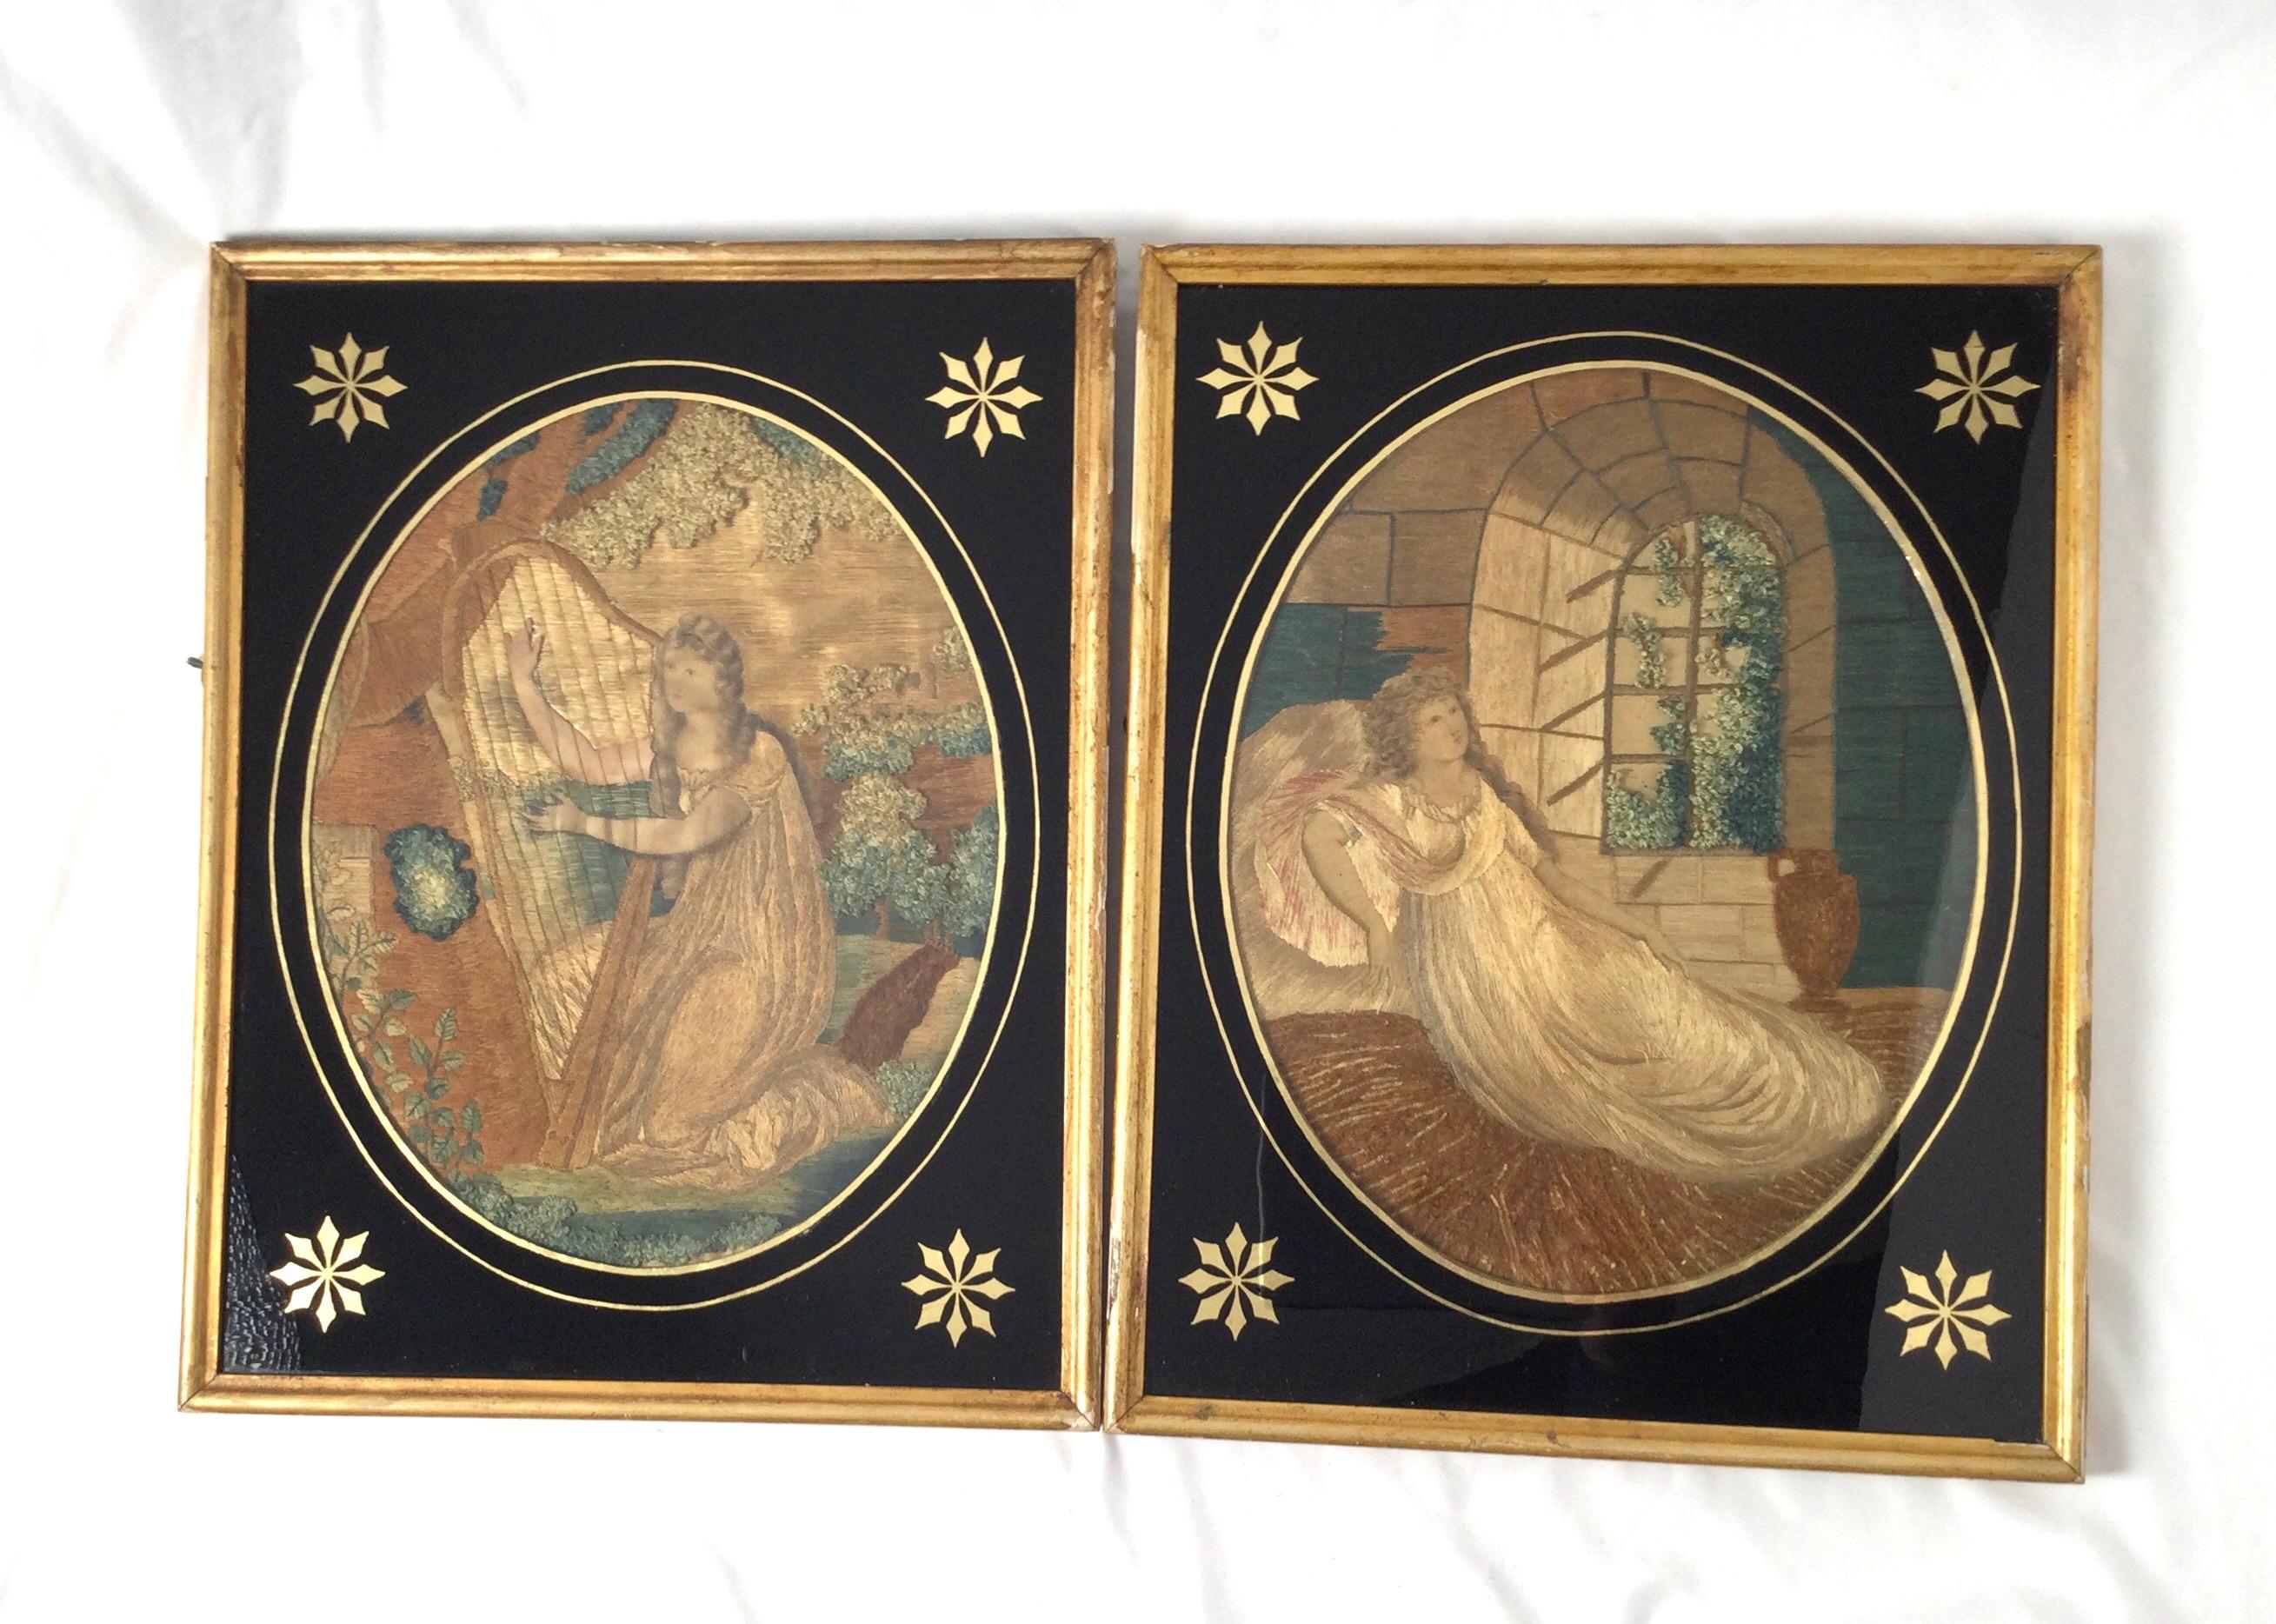 Pair of rare Regency Period embroidered and hand painted silk mourning pictures. Black and gold reverse painted glass. Extremely fine well detailed silks. One embroidery features a woman playing a harp the other a maiden lounging. Good age